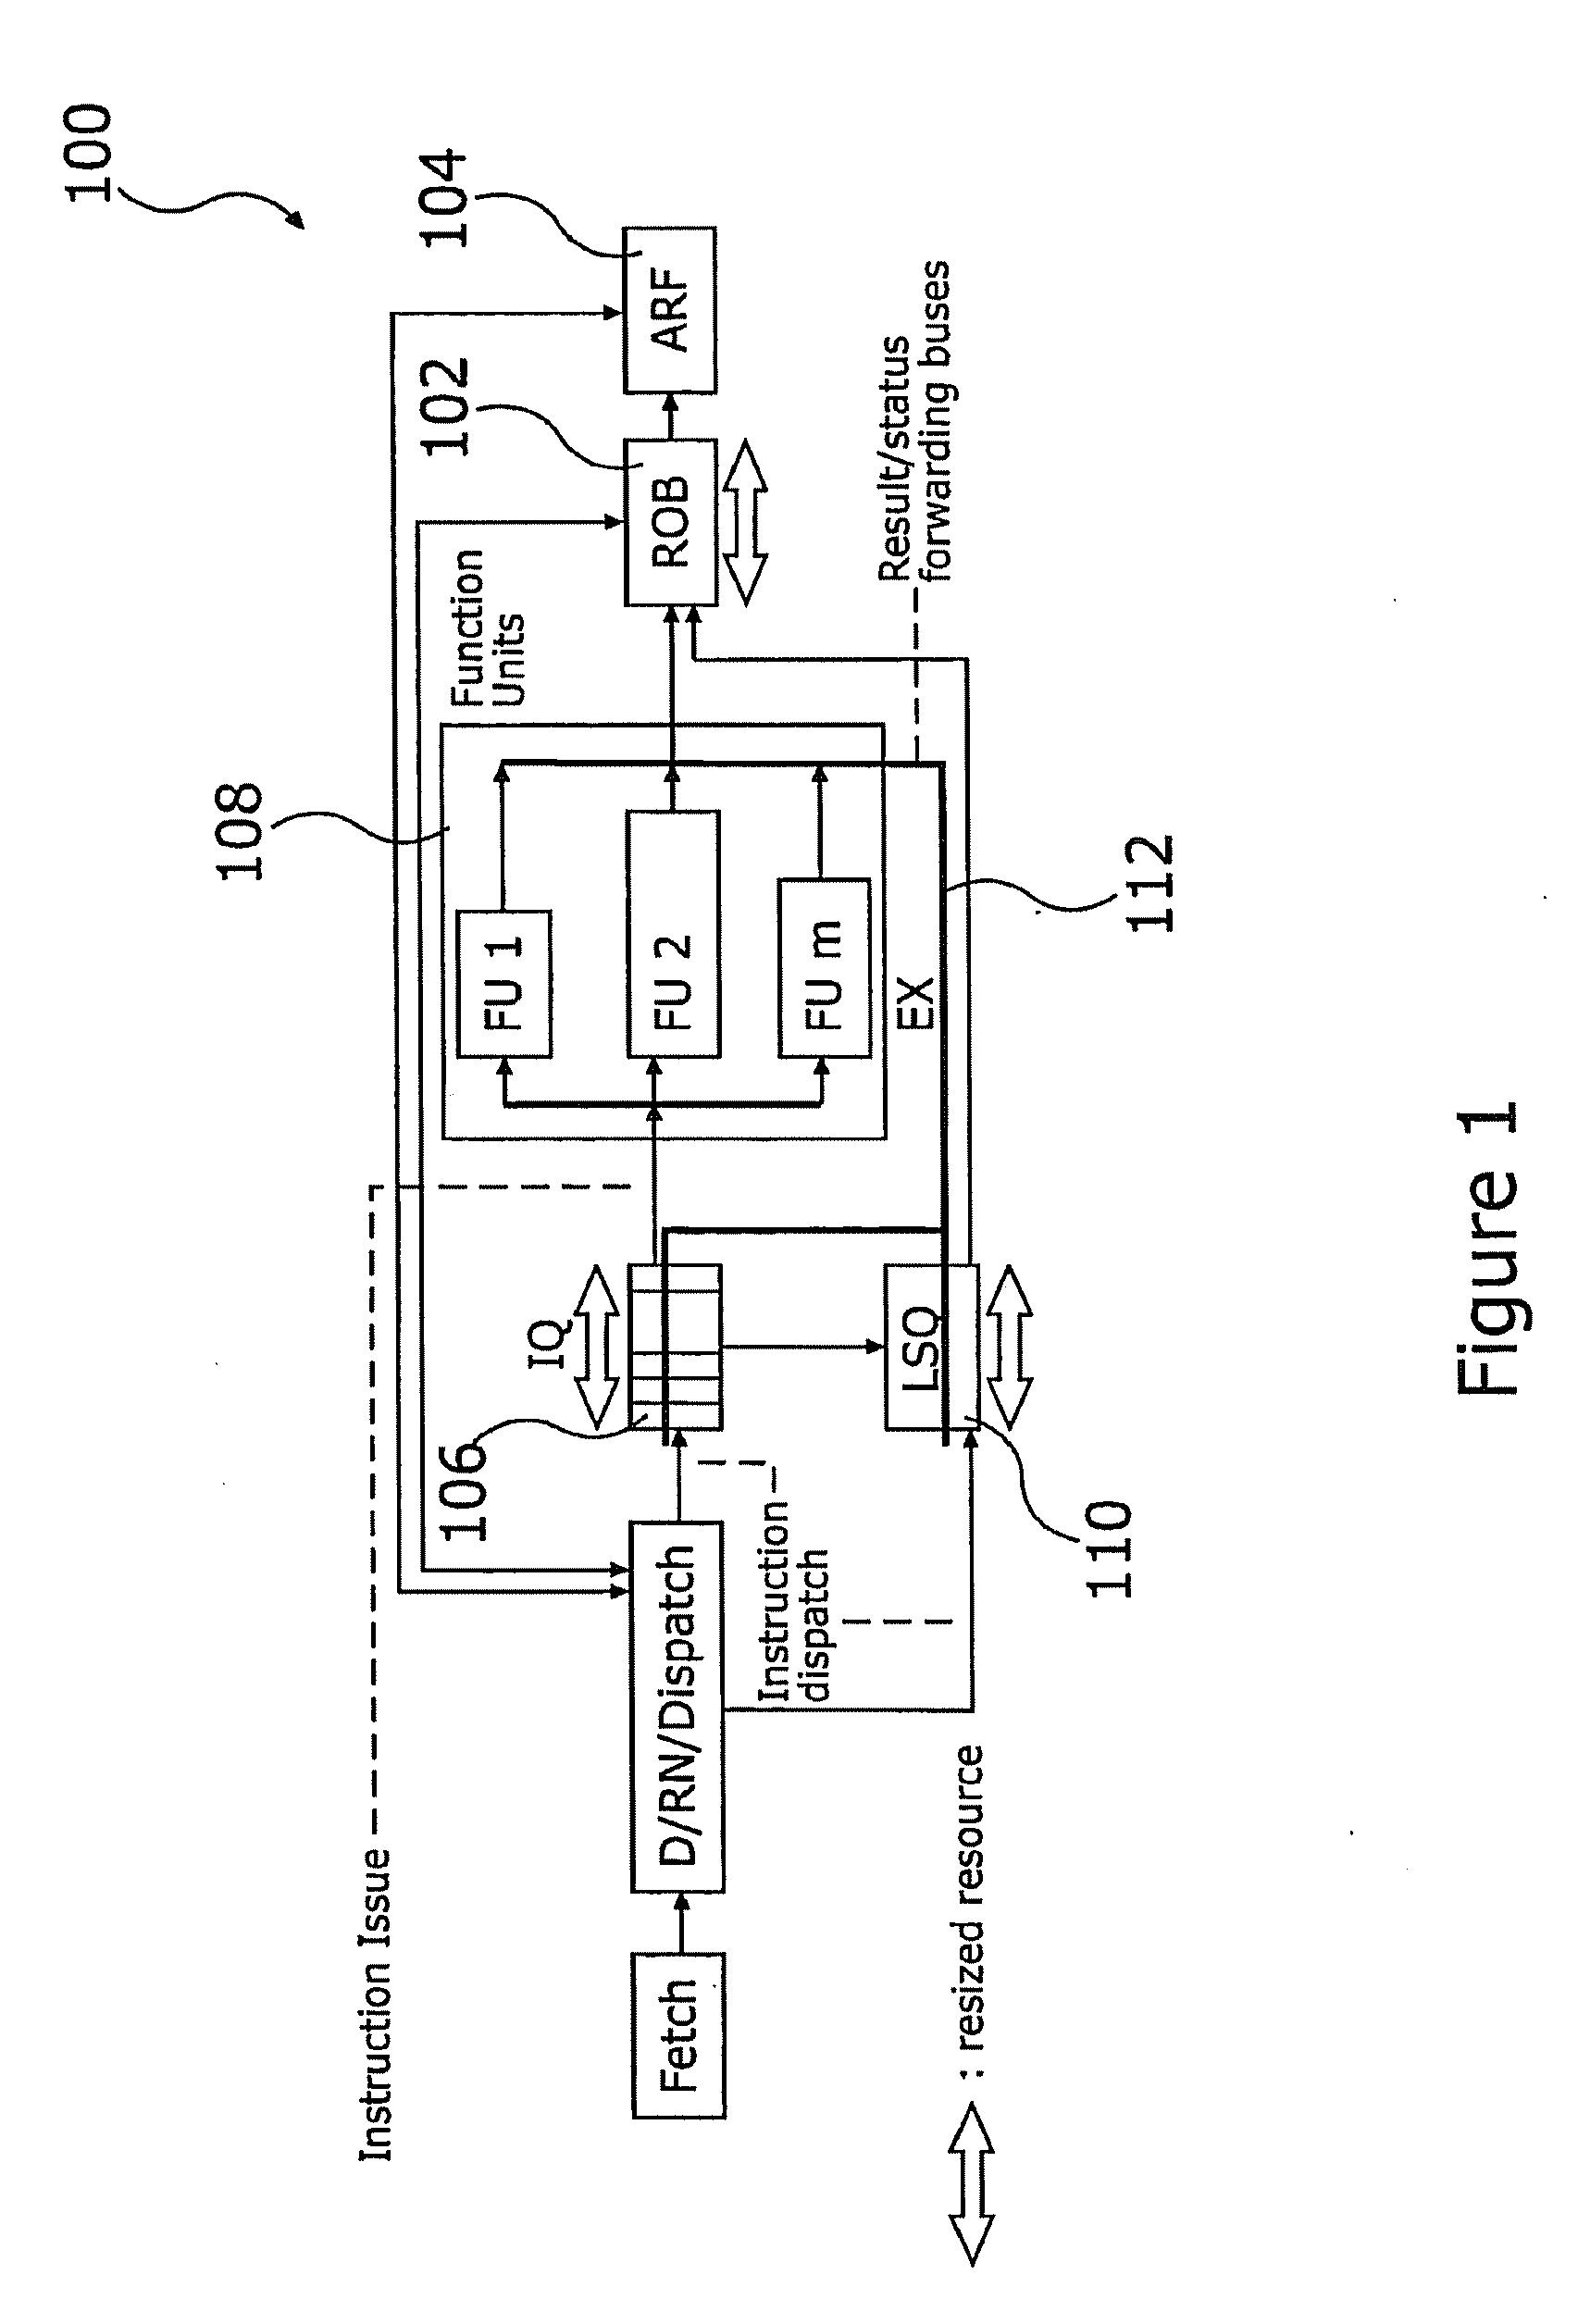 System and Method for Reducing Power Requirements of Microprocessors Through Dynamic Allocation of Datapath Resources